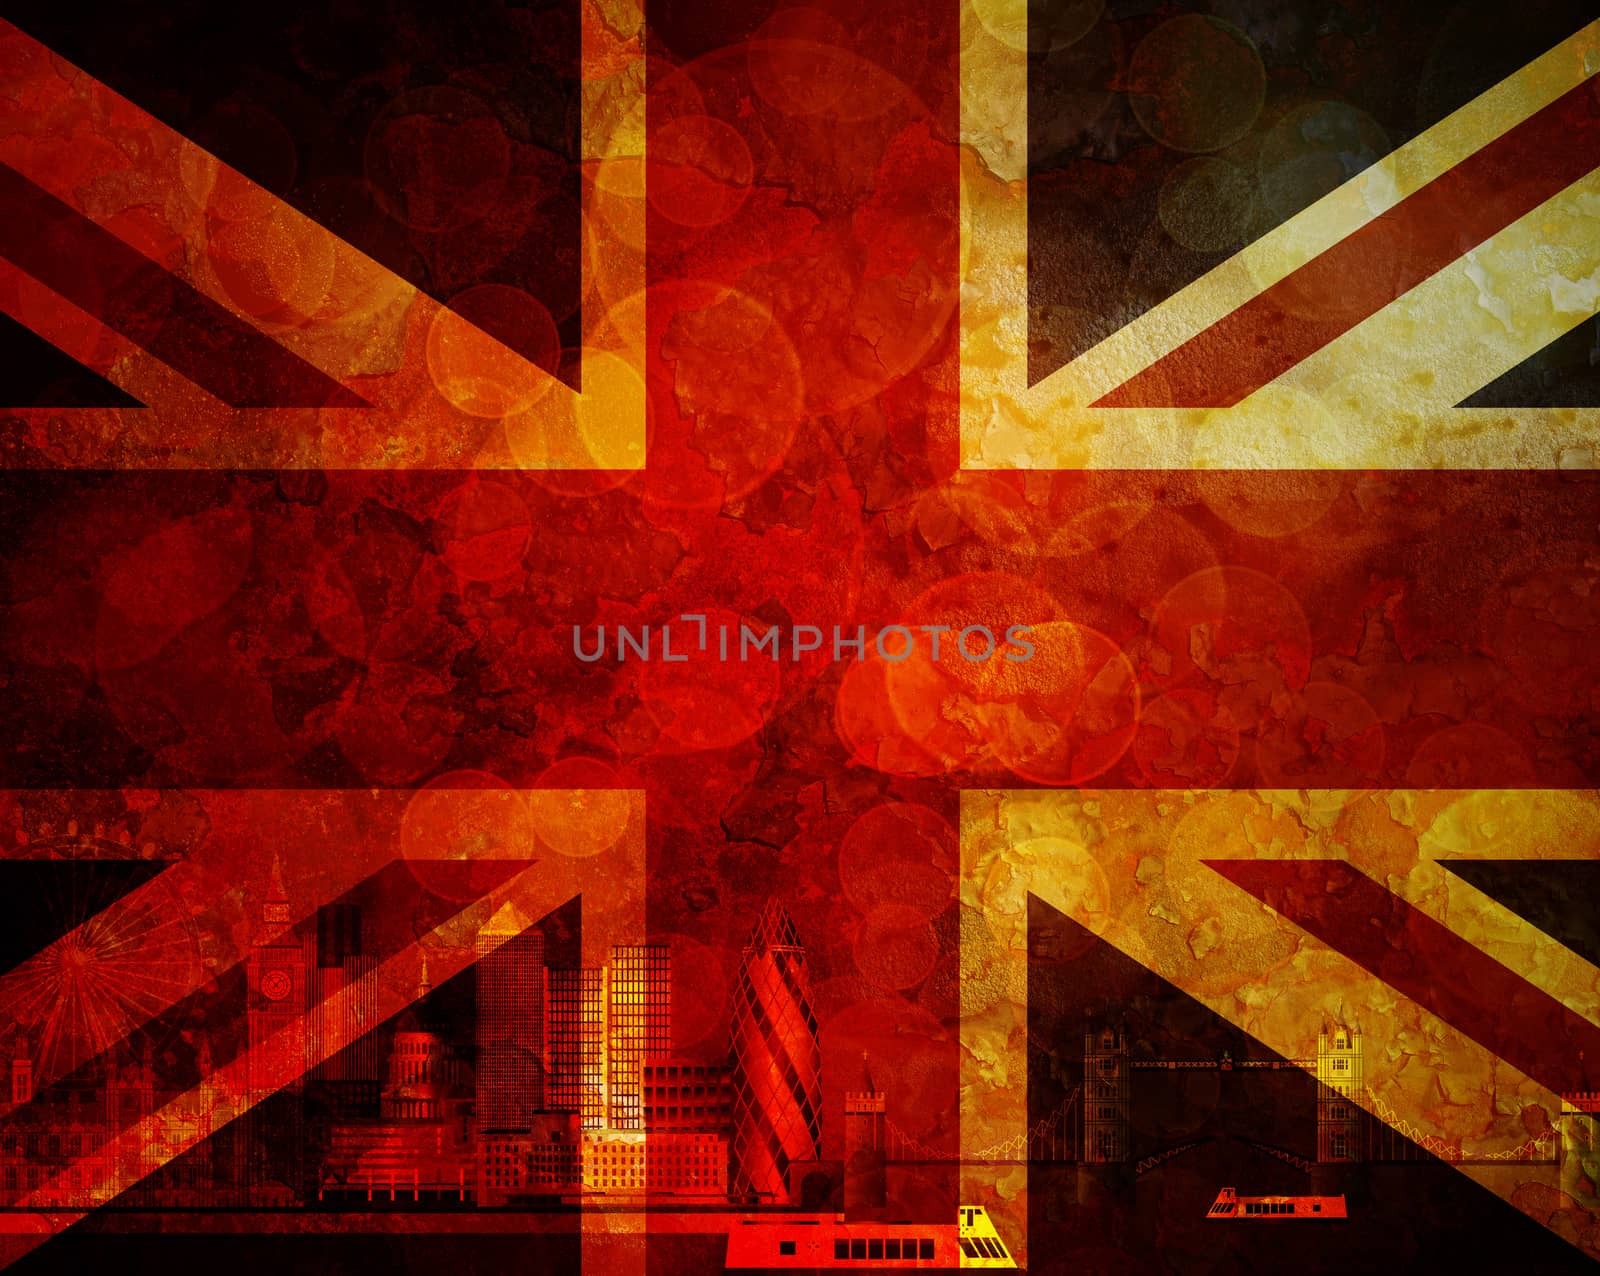 London Great Britain City Skyline Panorama in Union Jack Flag Grunge Texture Background Color Illustration